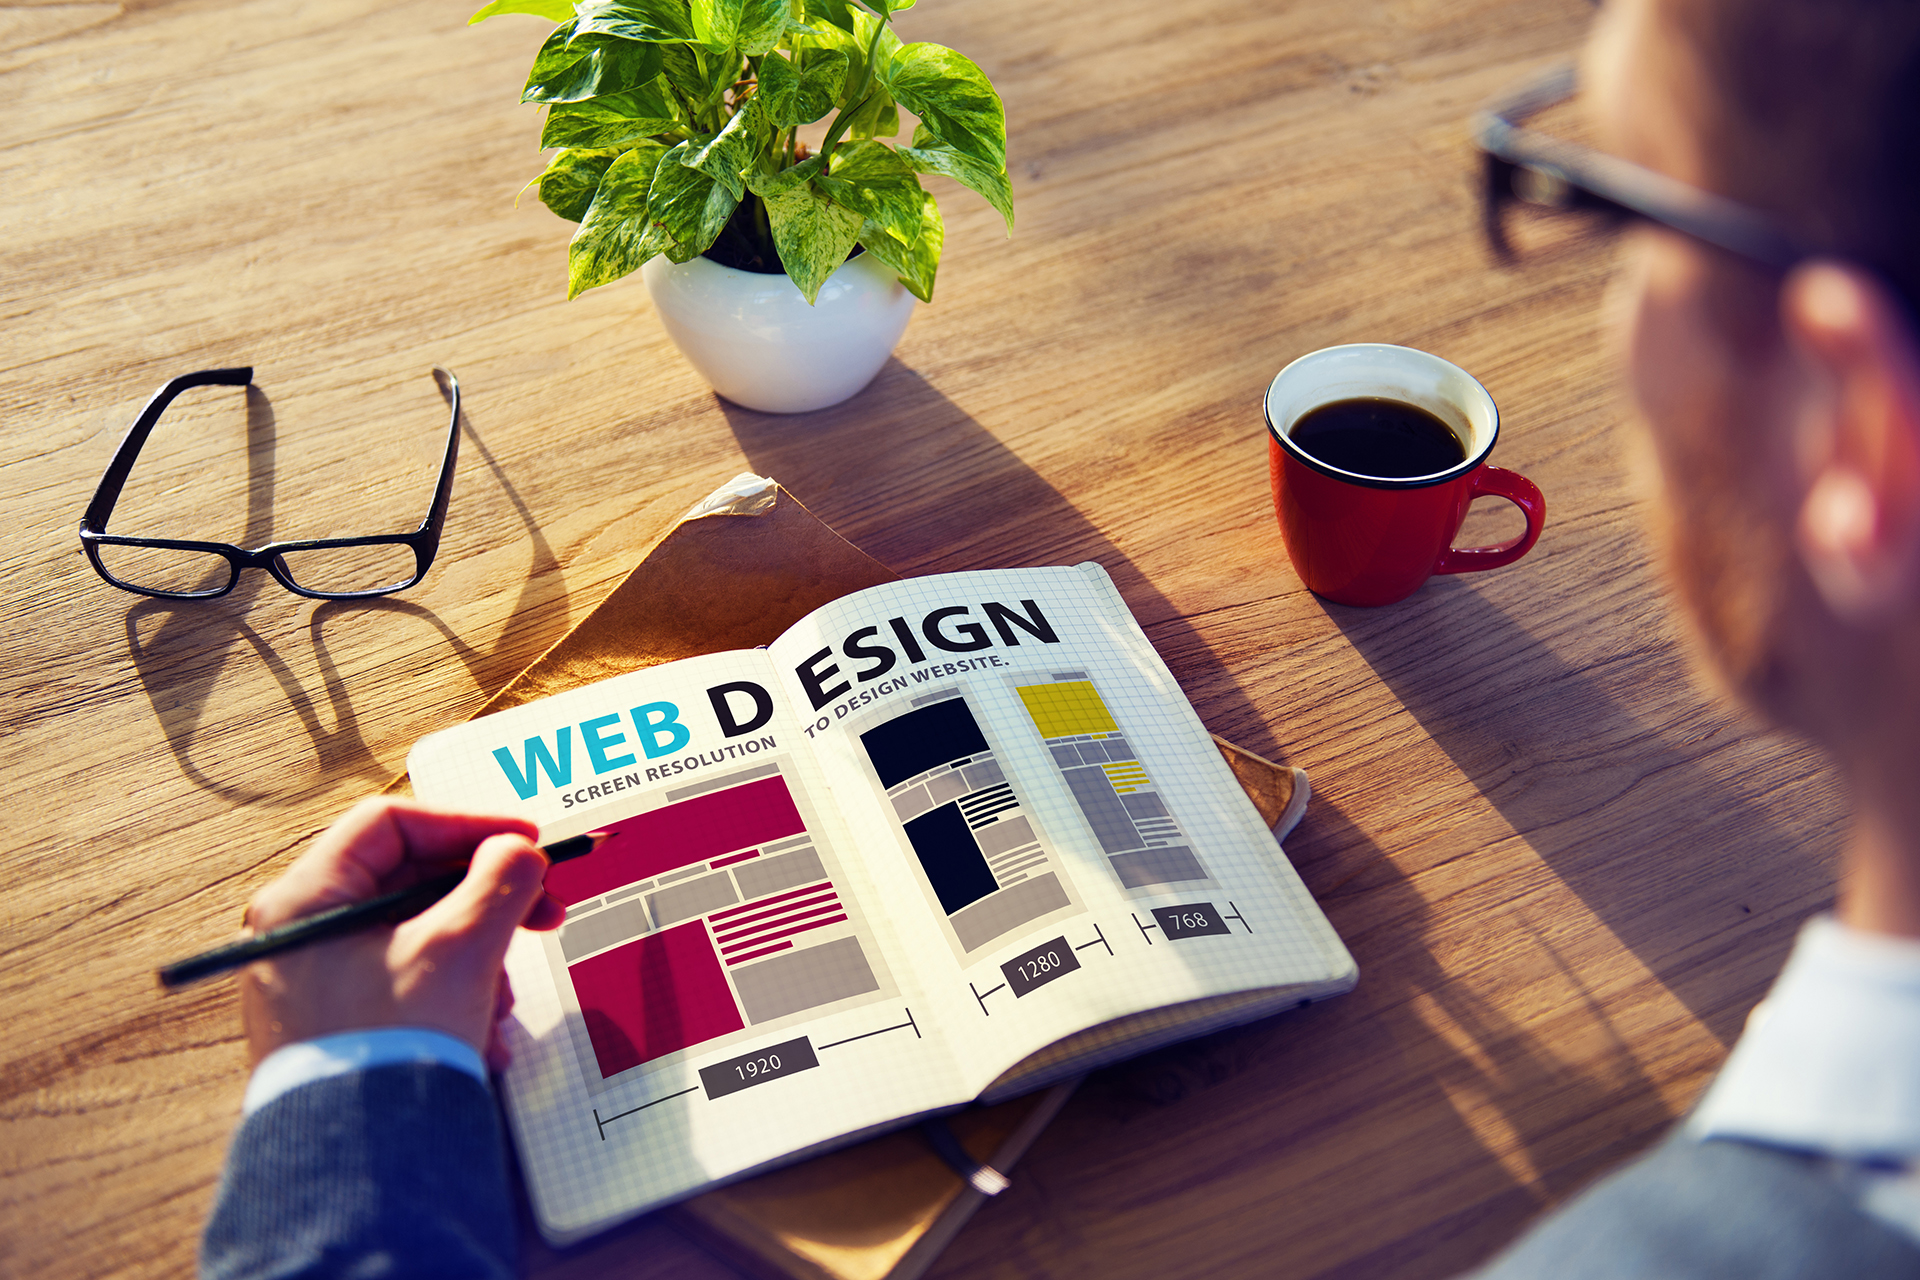 Build Websites From Scratch With the best Technologies